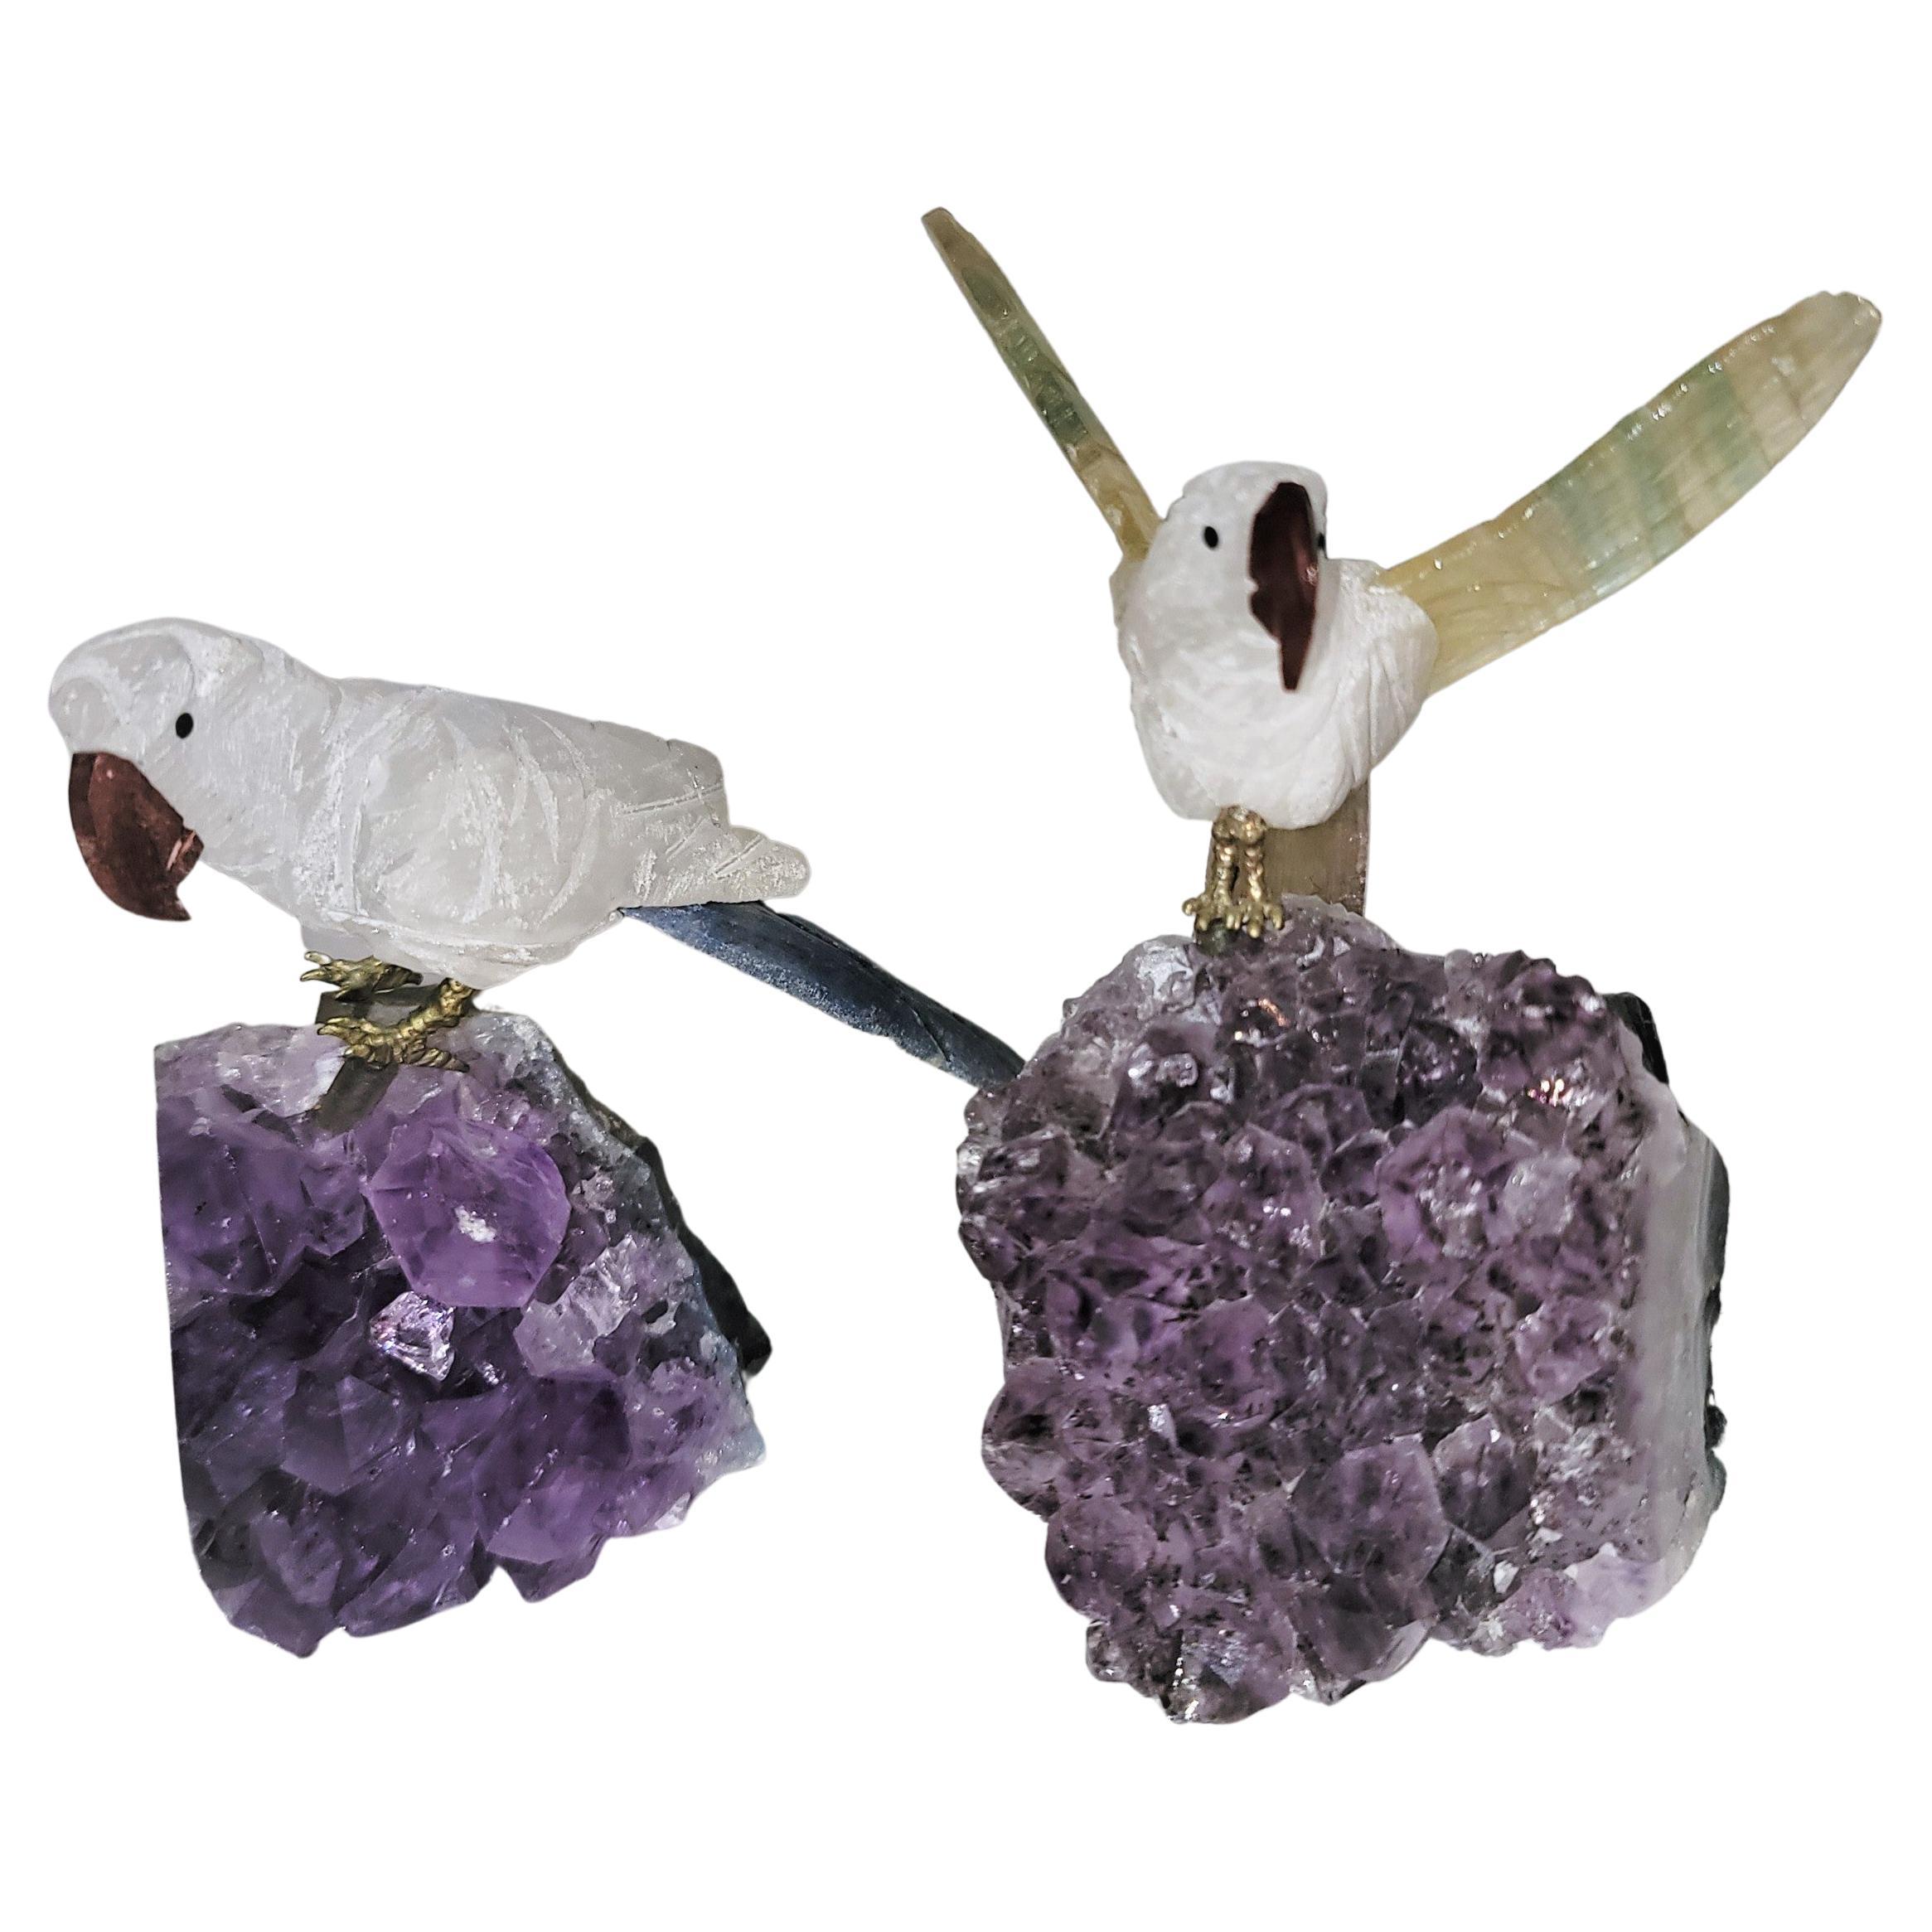 Pair of crystal and amethyst birds. Great color and very attractive. The birds are removable and have small holes where stands are placed to be held within the amethyst rock.

Bird with open wing span measures - 
3.5 W x 4.25 H x 3.25 D

Bird with